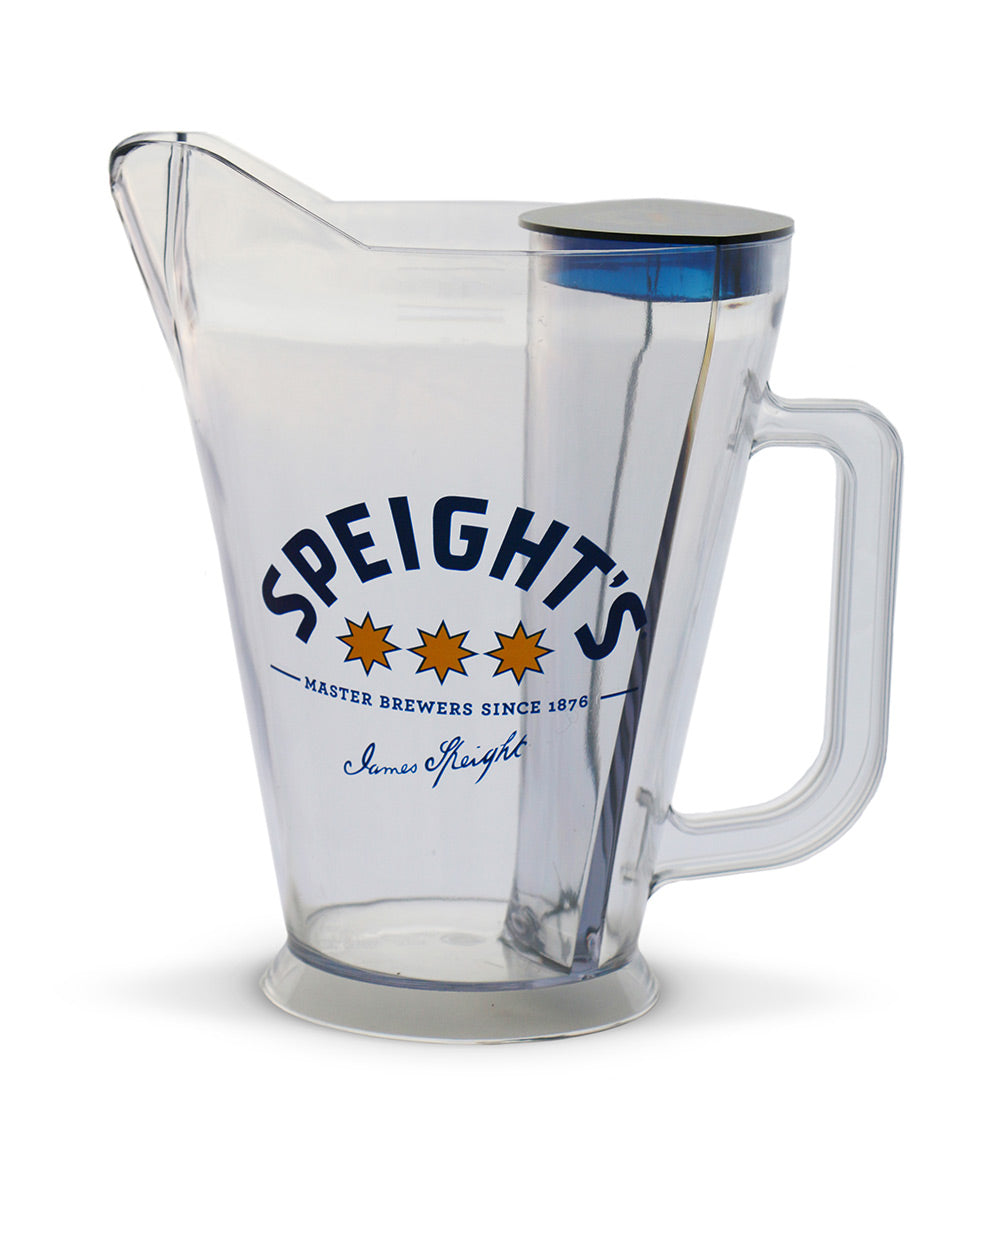 Speight's 1.5L Ice Cooler Jug -  Beer Gear Apparel & Merchandise - Speights - Lion Red - VB - Tokyo Dy merch